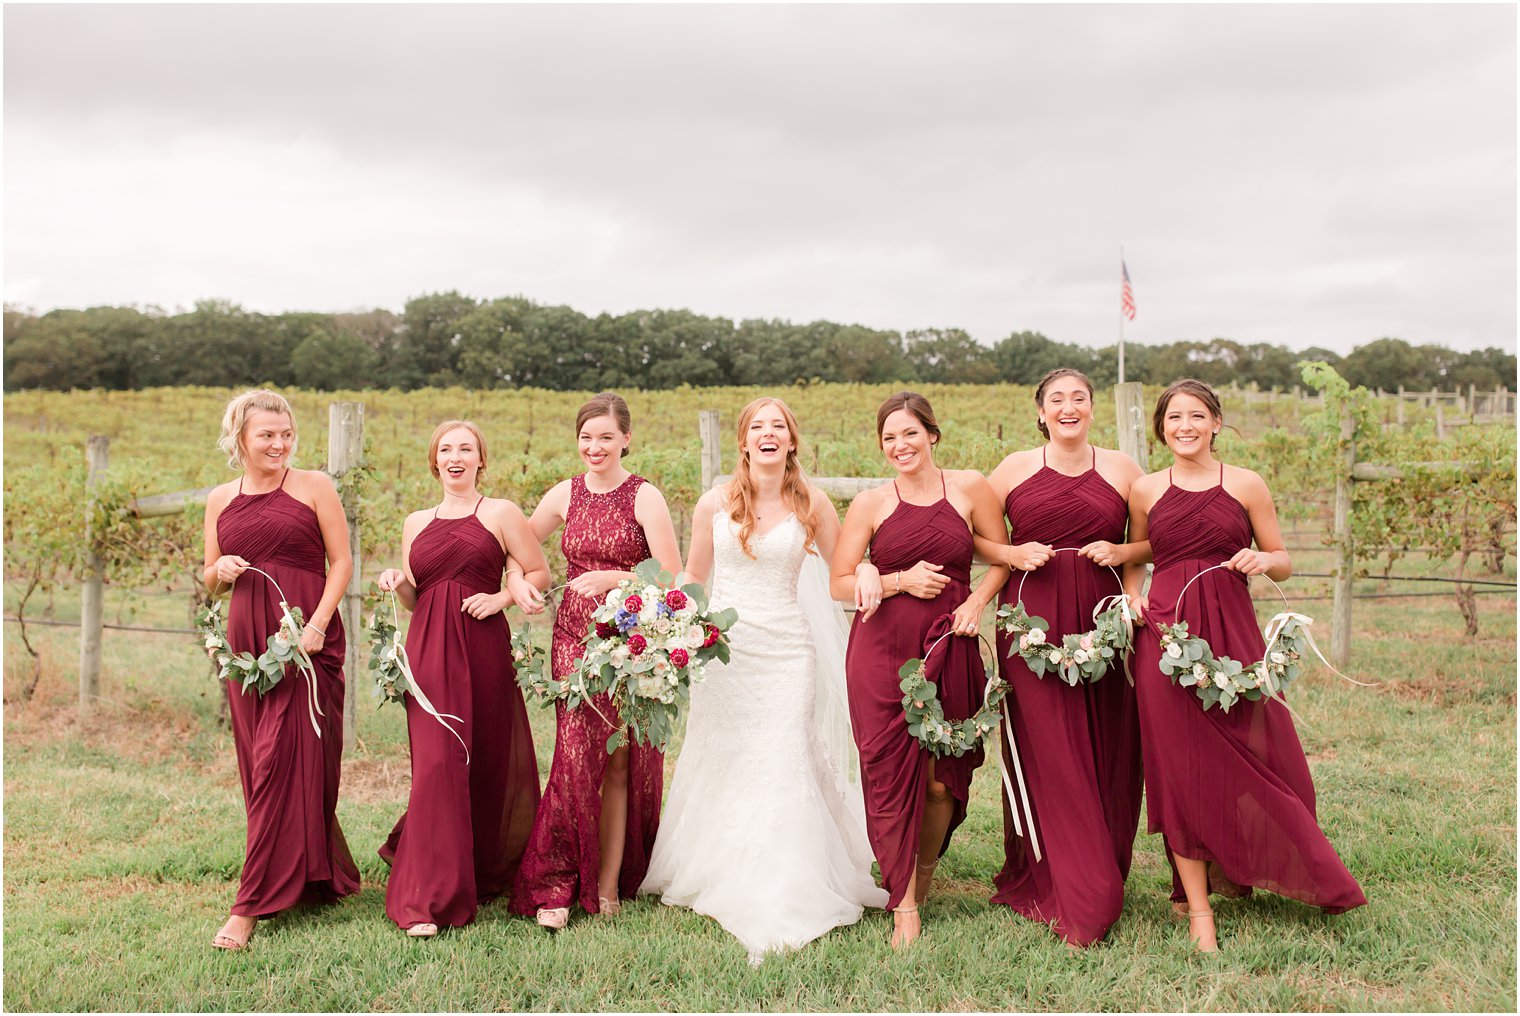 Candid bridesmaids photo in a vineyard